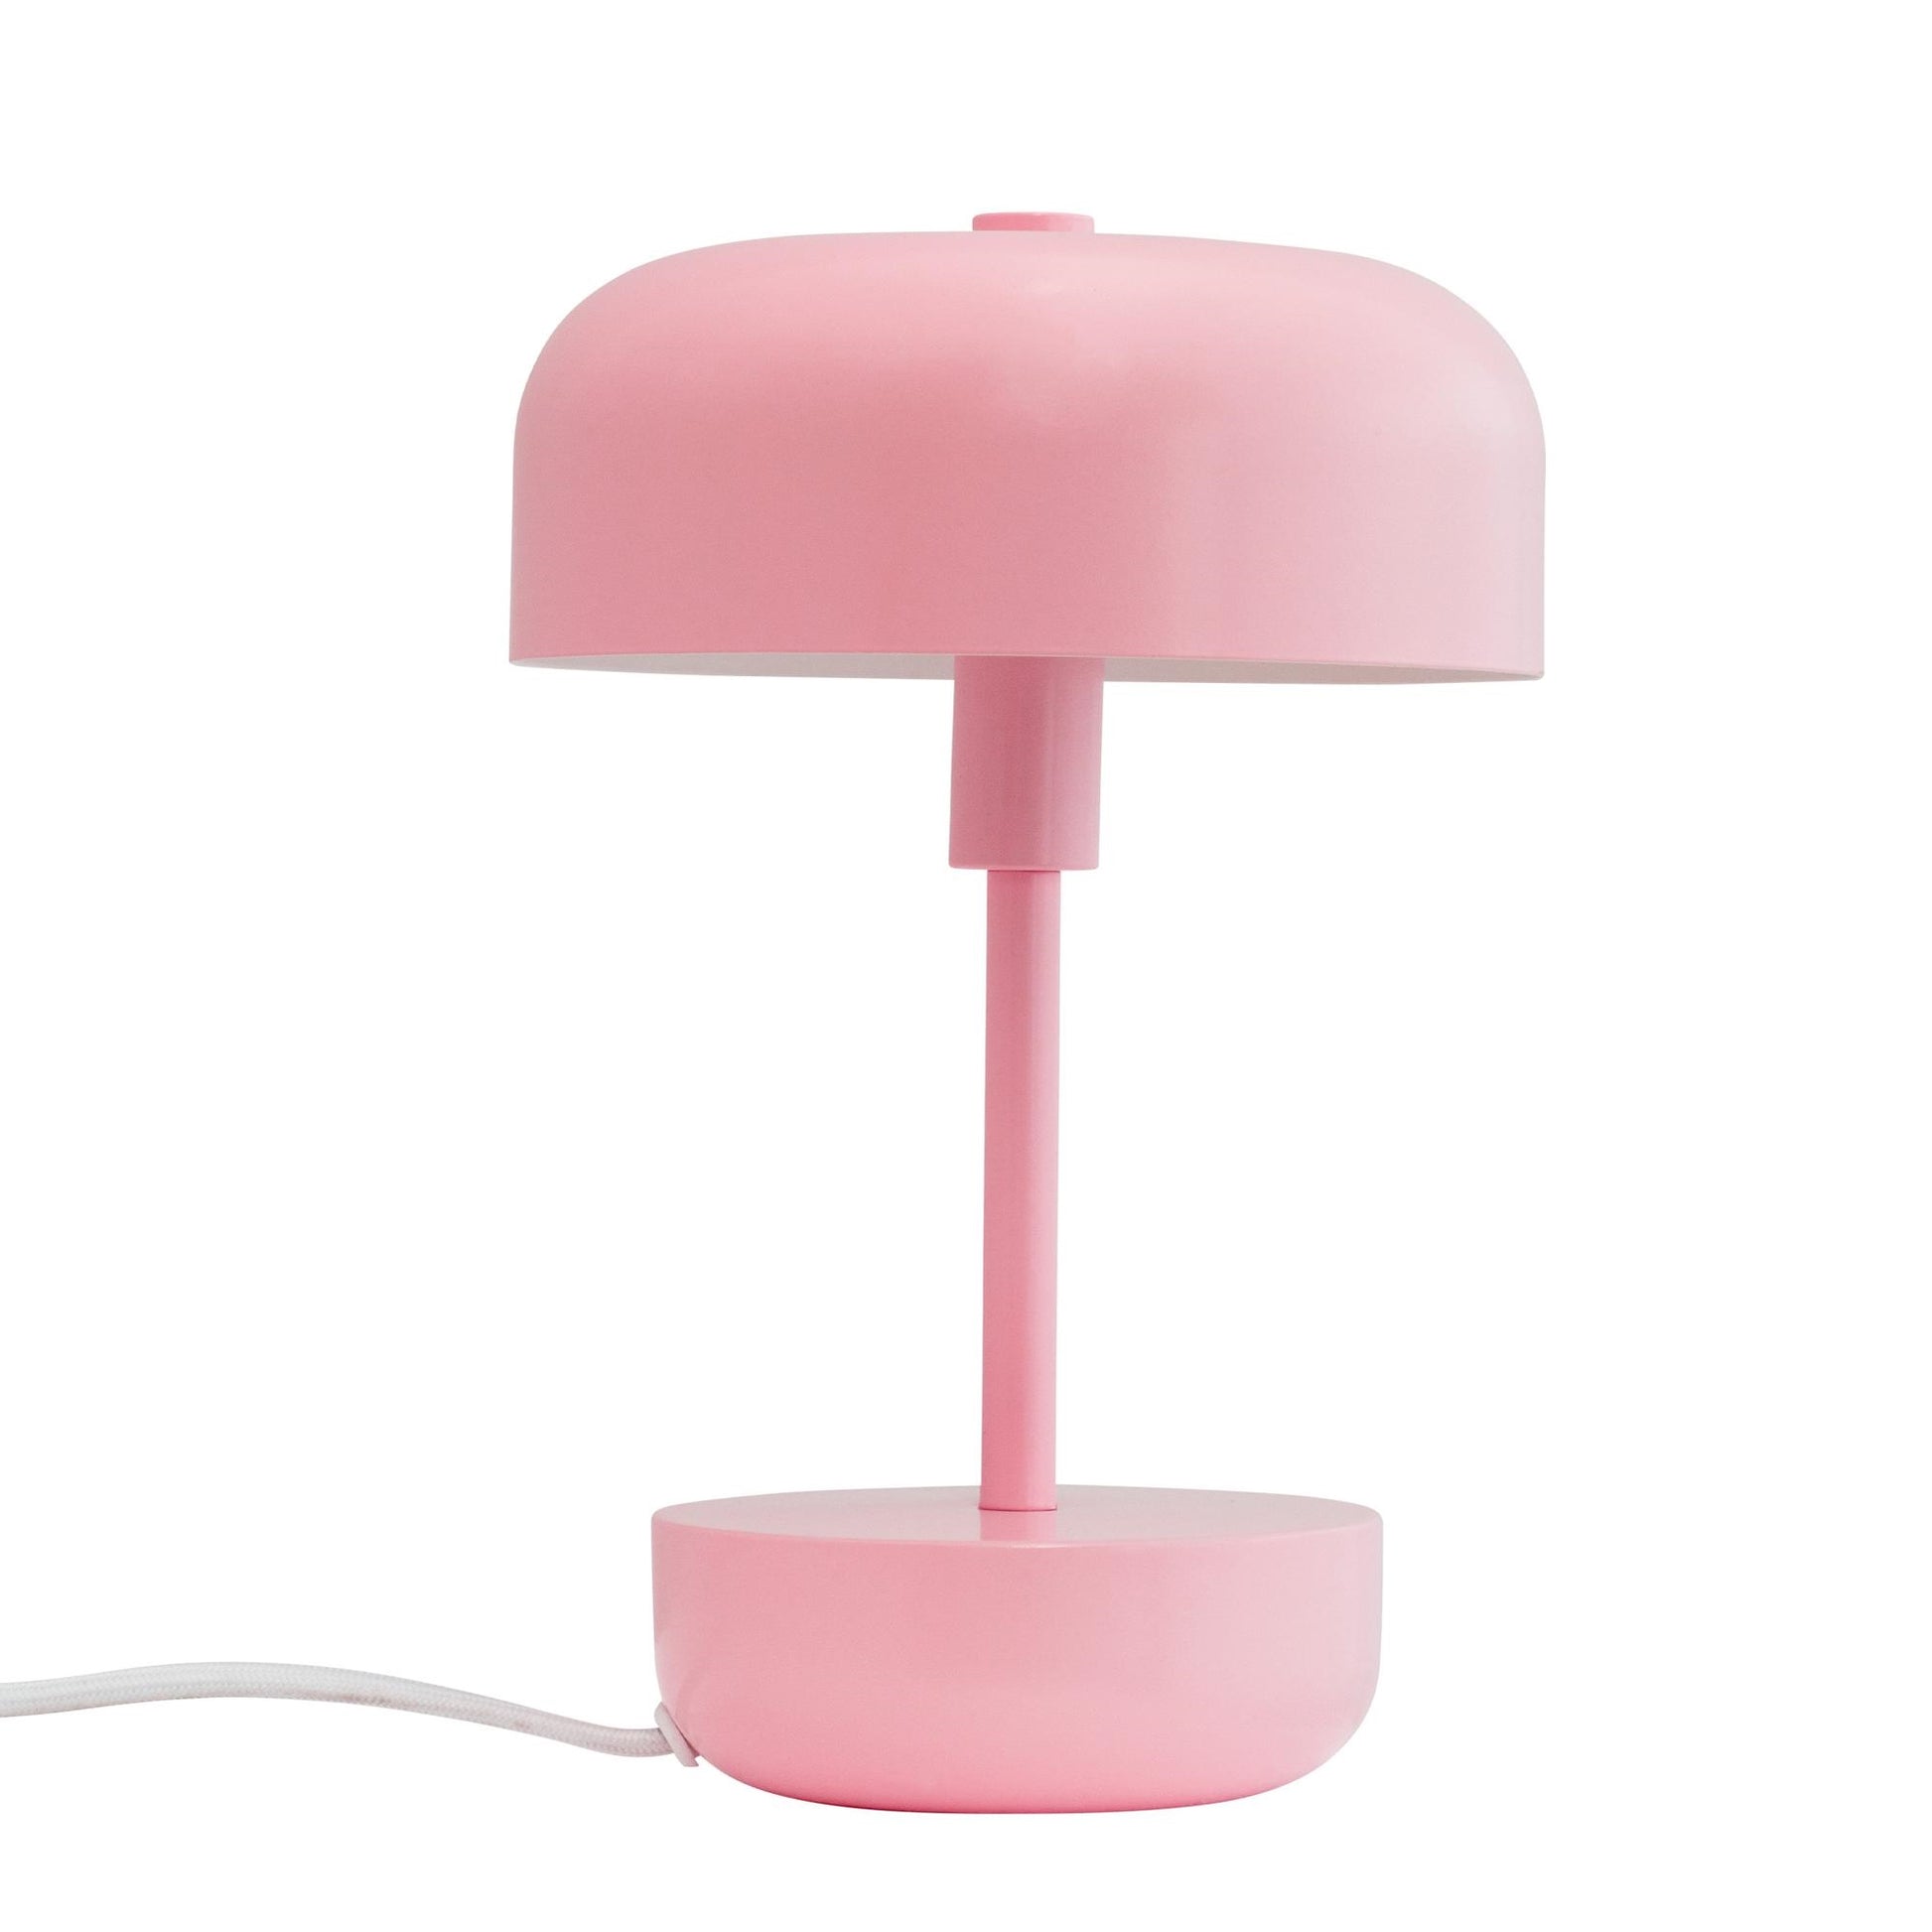 Haipot Table Lamp by Dyberg Larsen #